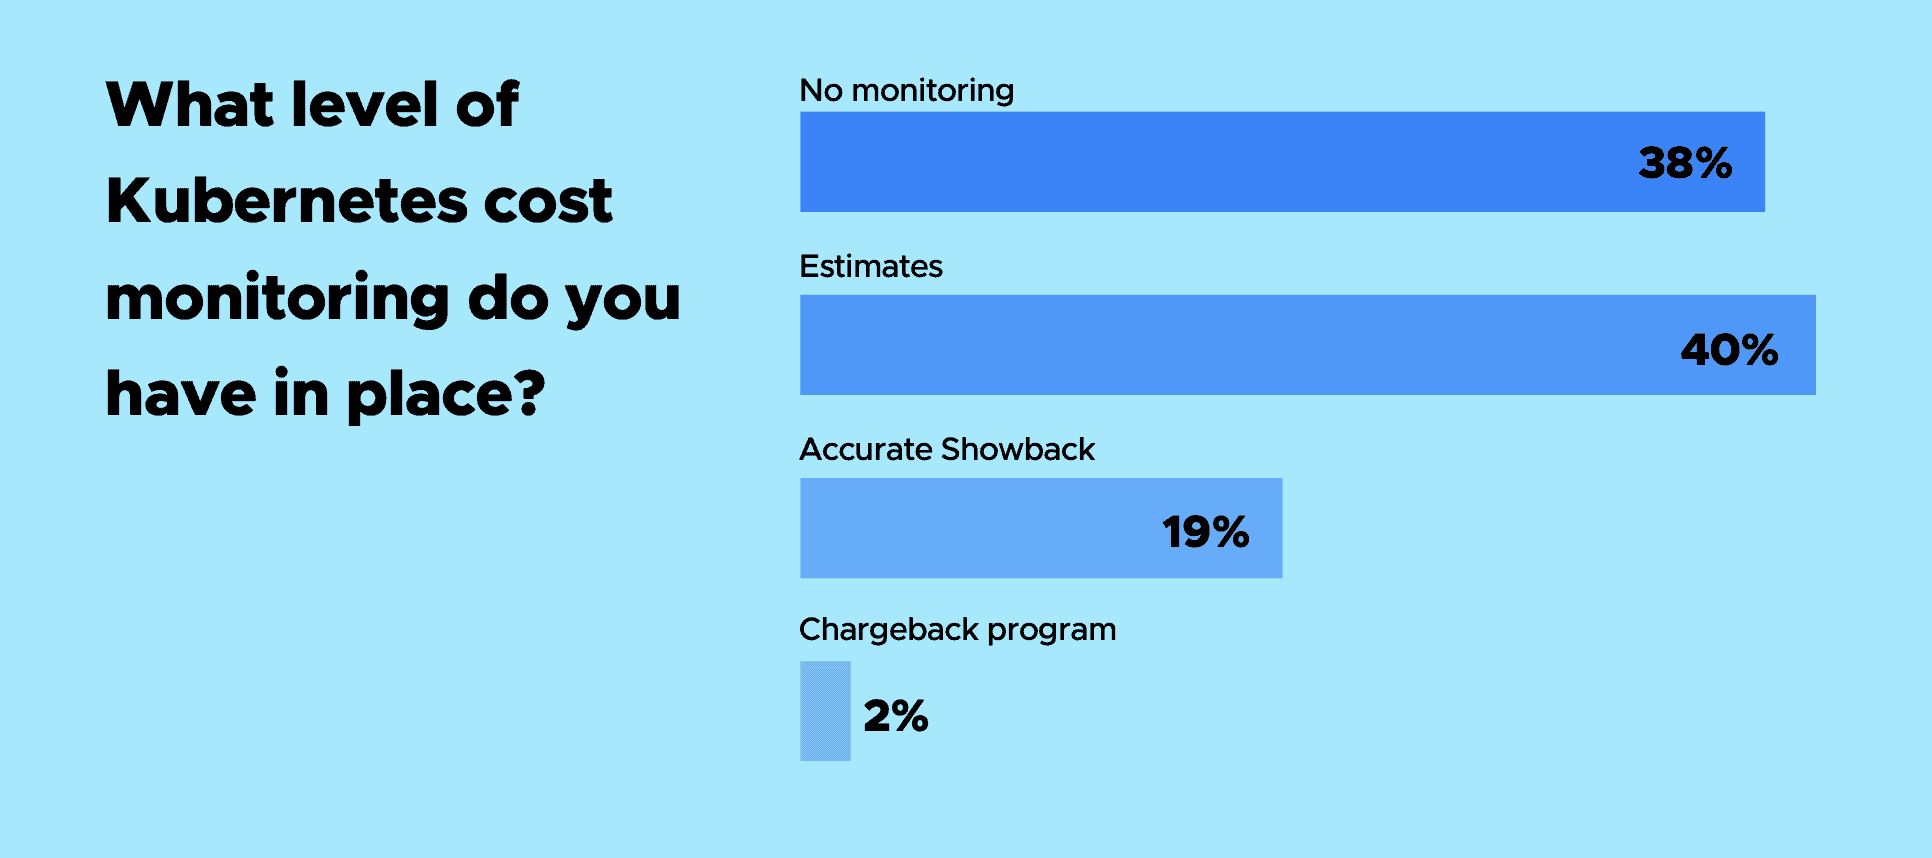 Bar chart showing respondent's answers for "What level of kubernetes cost monitoring do you have in place?" 40% of the respondents chose estimates